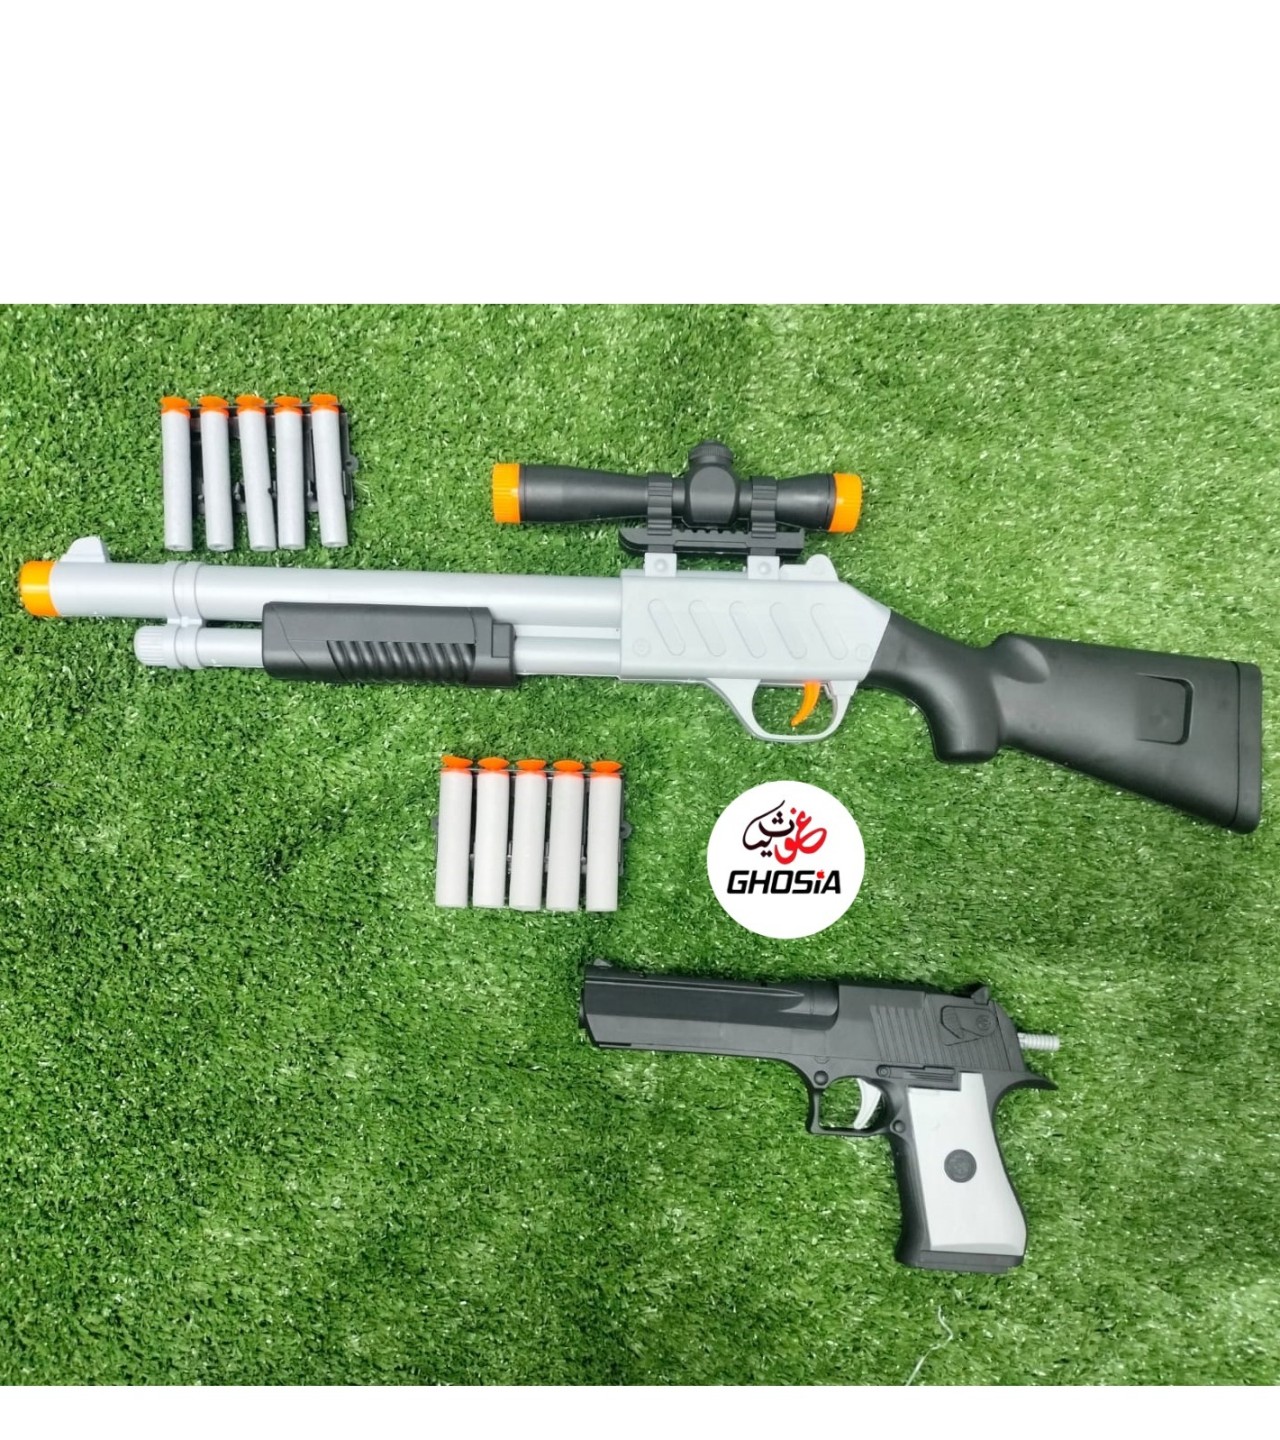 2 in 1 Soft Dart Nerf Launcher Toy Gun For Children Nerf Blaster Guns Toy With Soft Darts And Aim Board For Kids